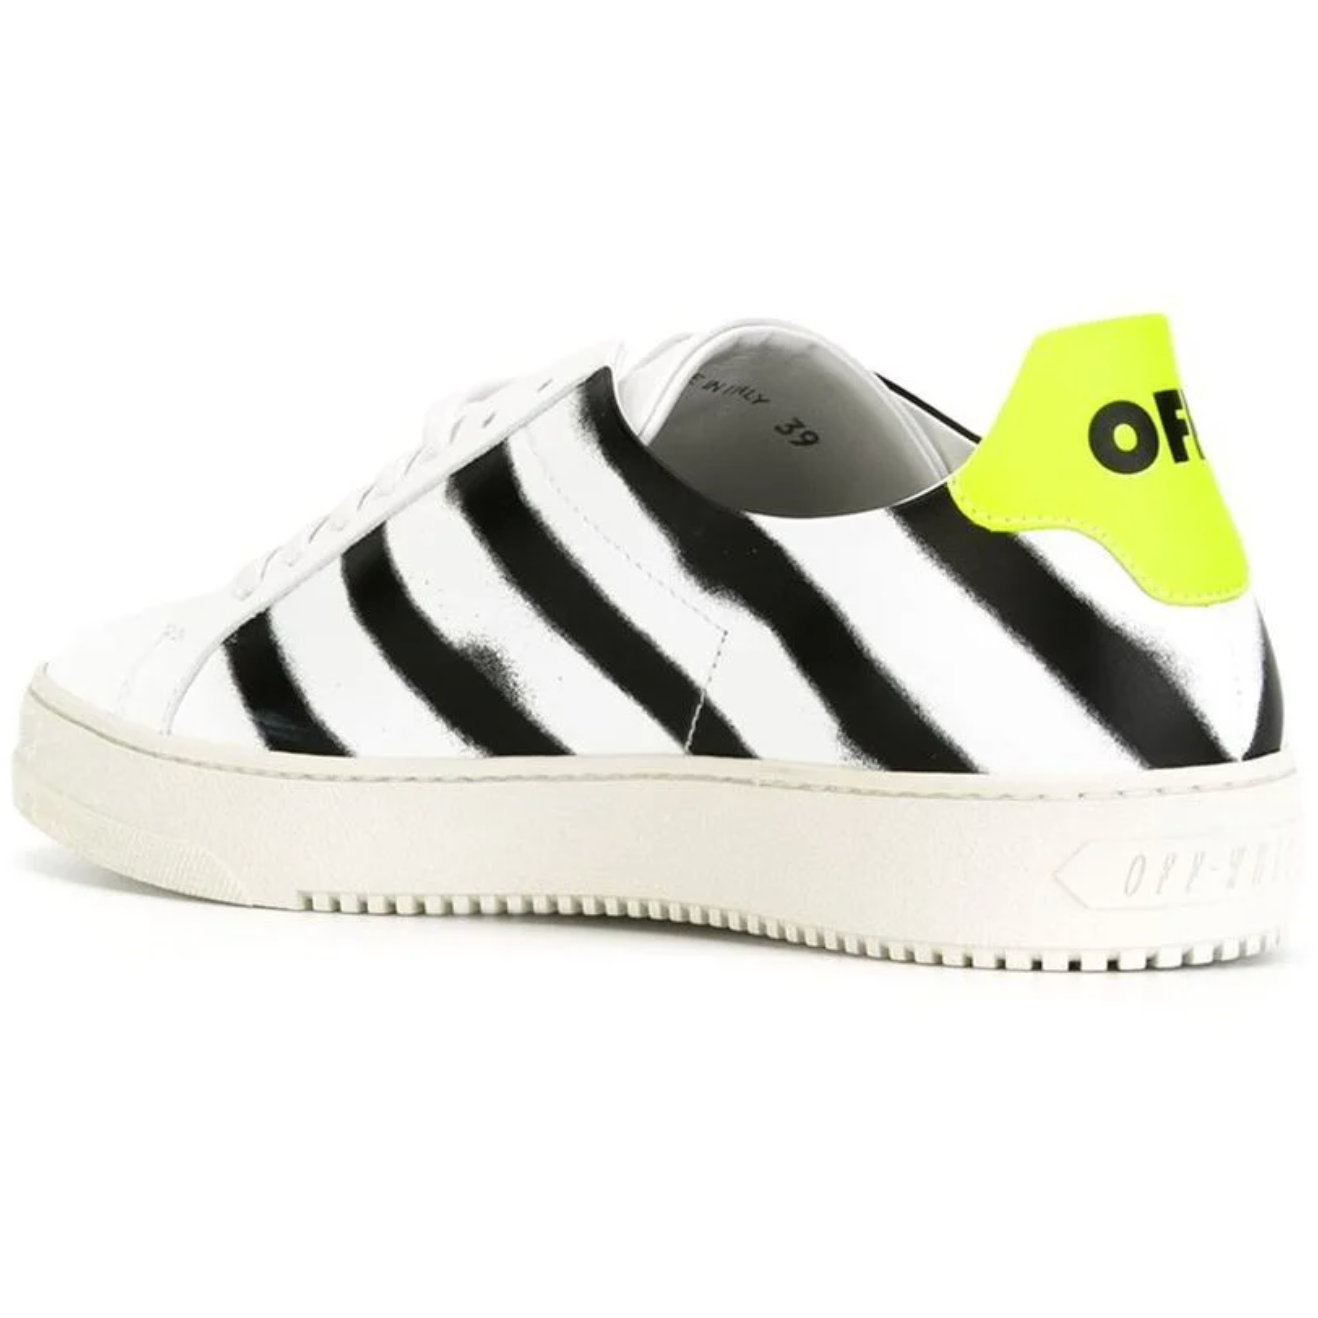 Off-White Spray Paint Splash White Sneakers white-leather-sneakers product-9094-1167297236-74843592-55b.png